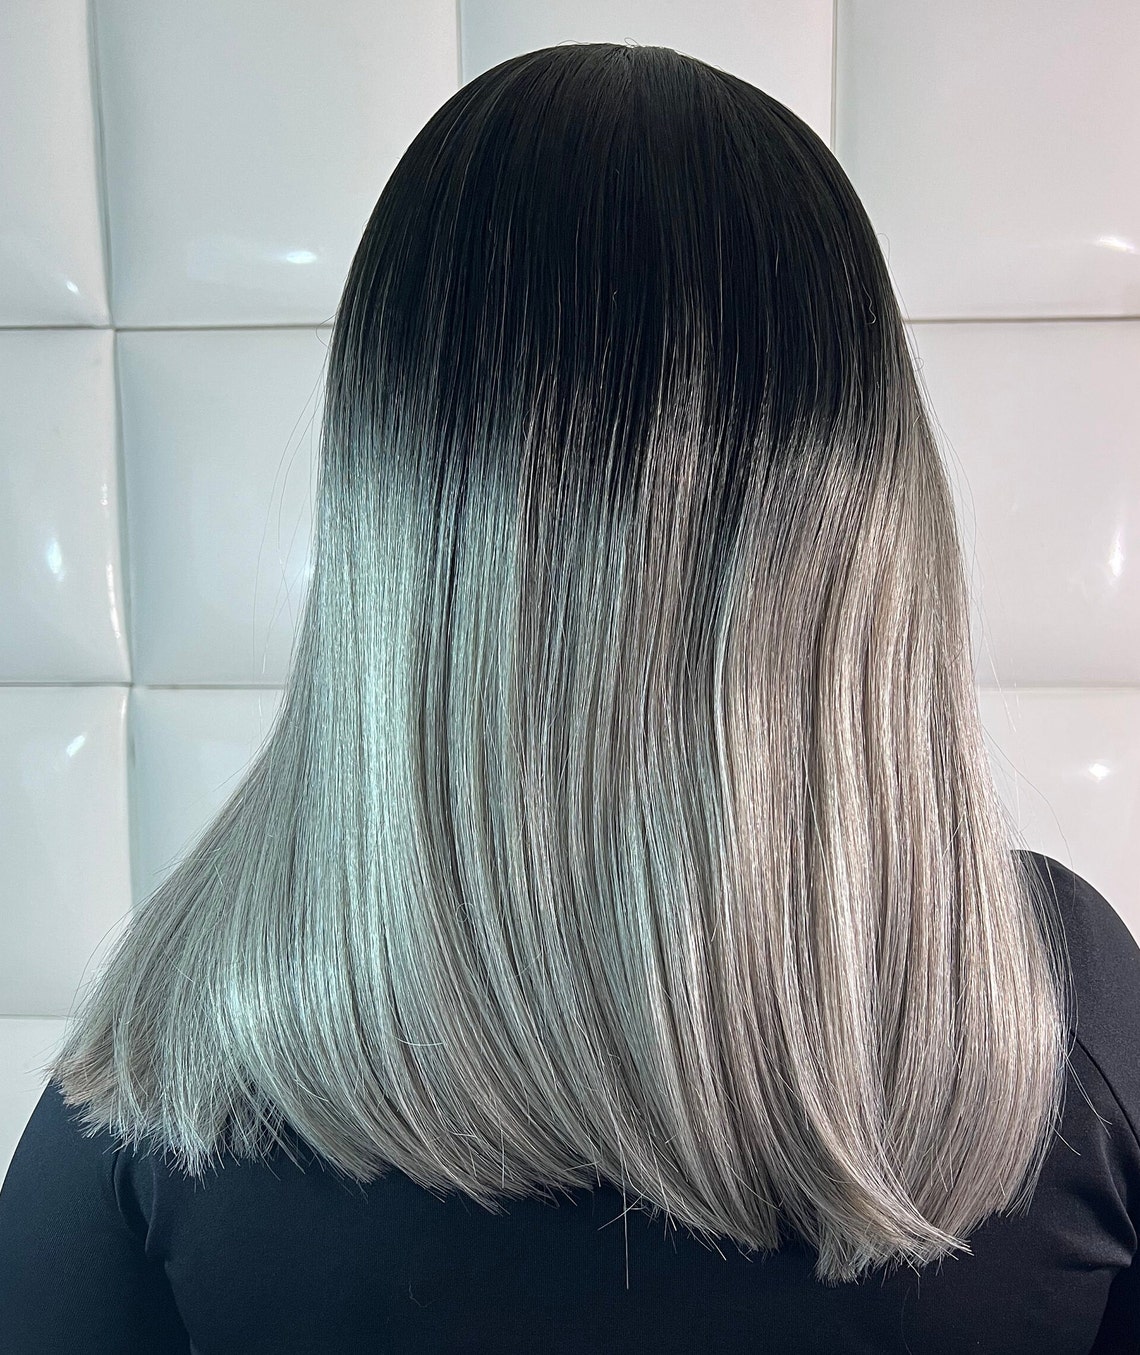 Synthetic Swiss Lace Front Wig GREY GRAY Silver OMBRE black | Etsy